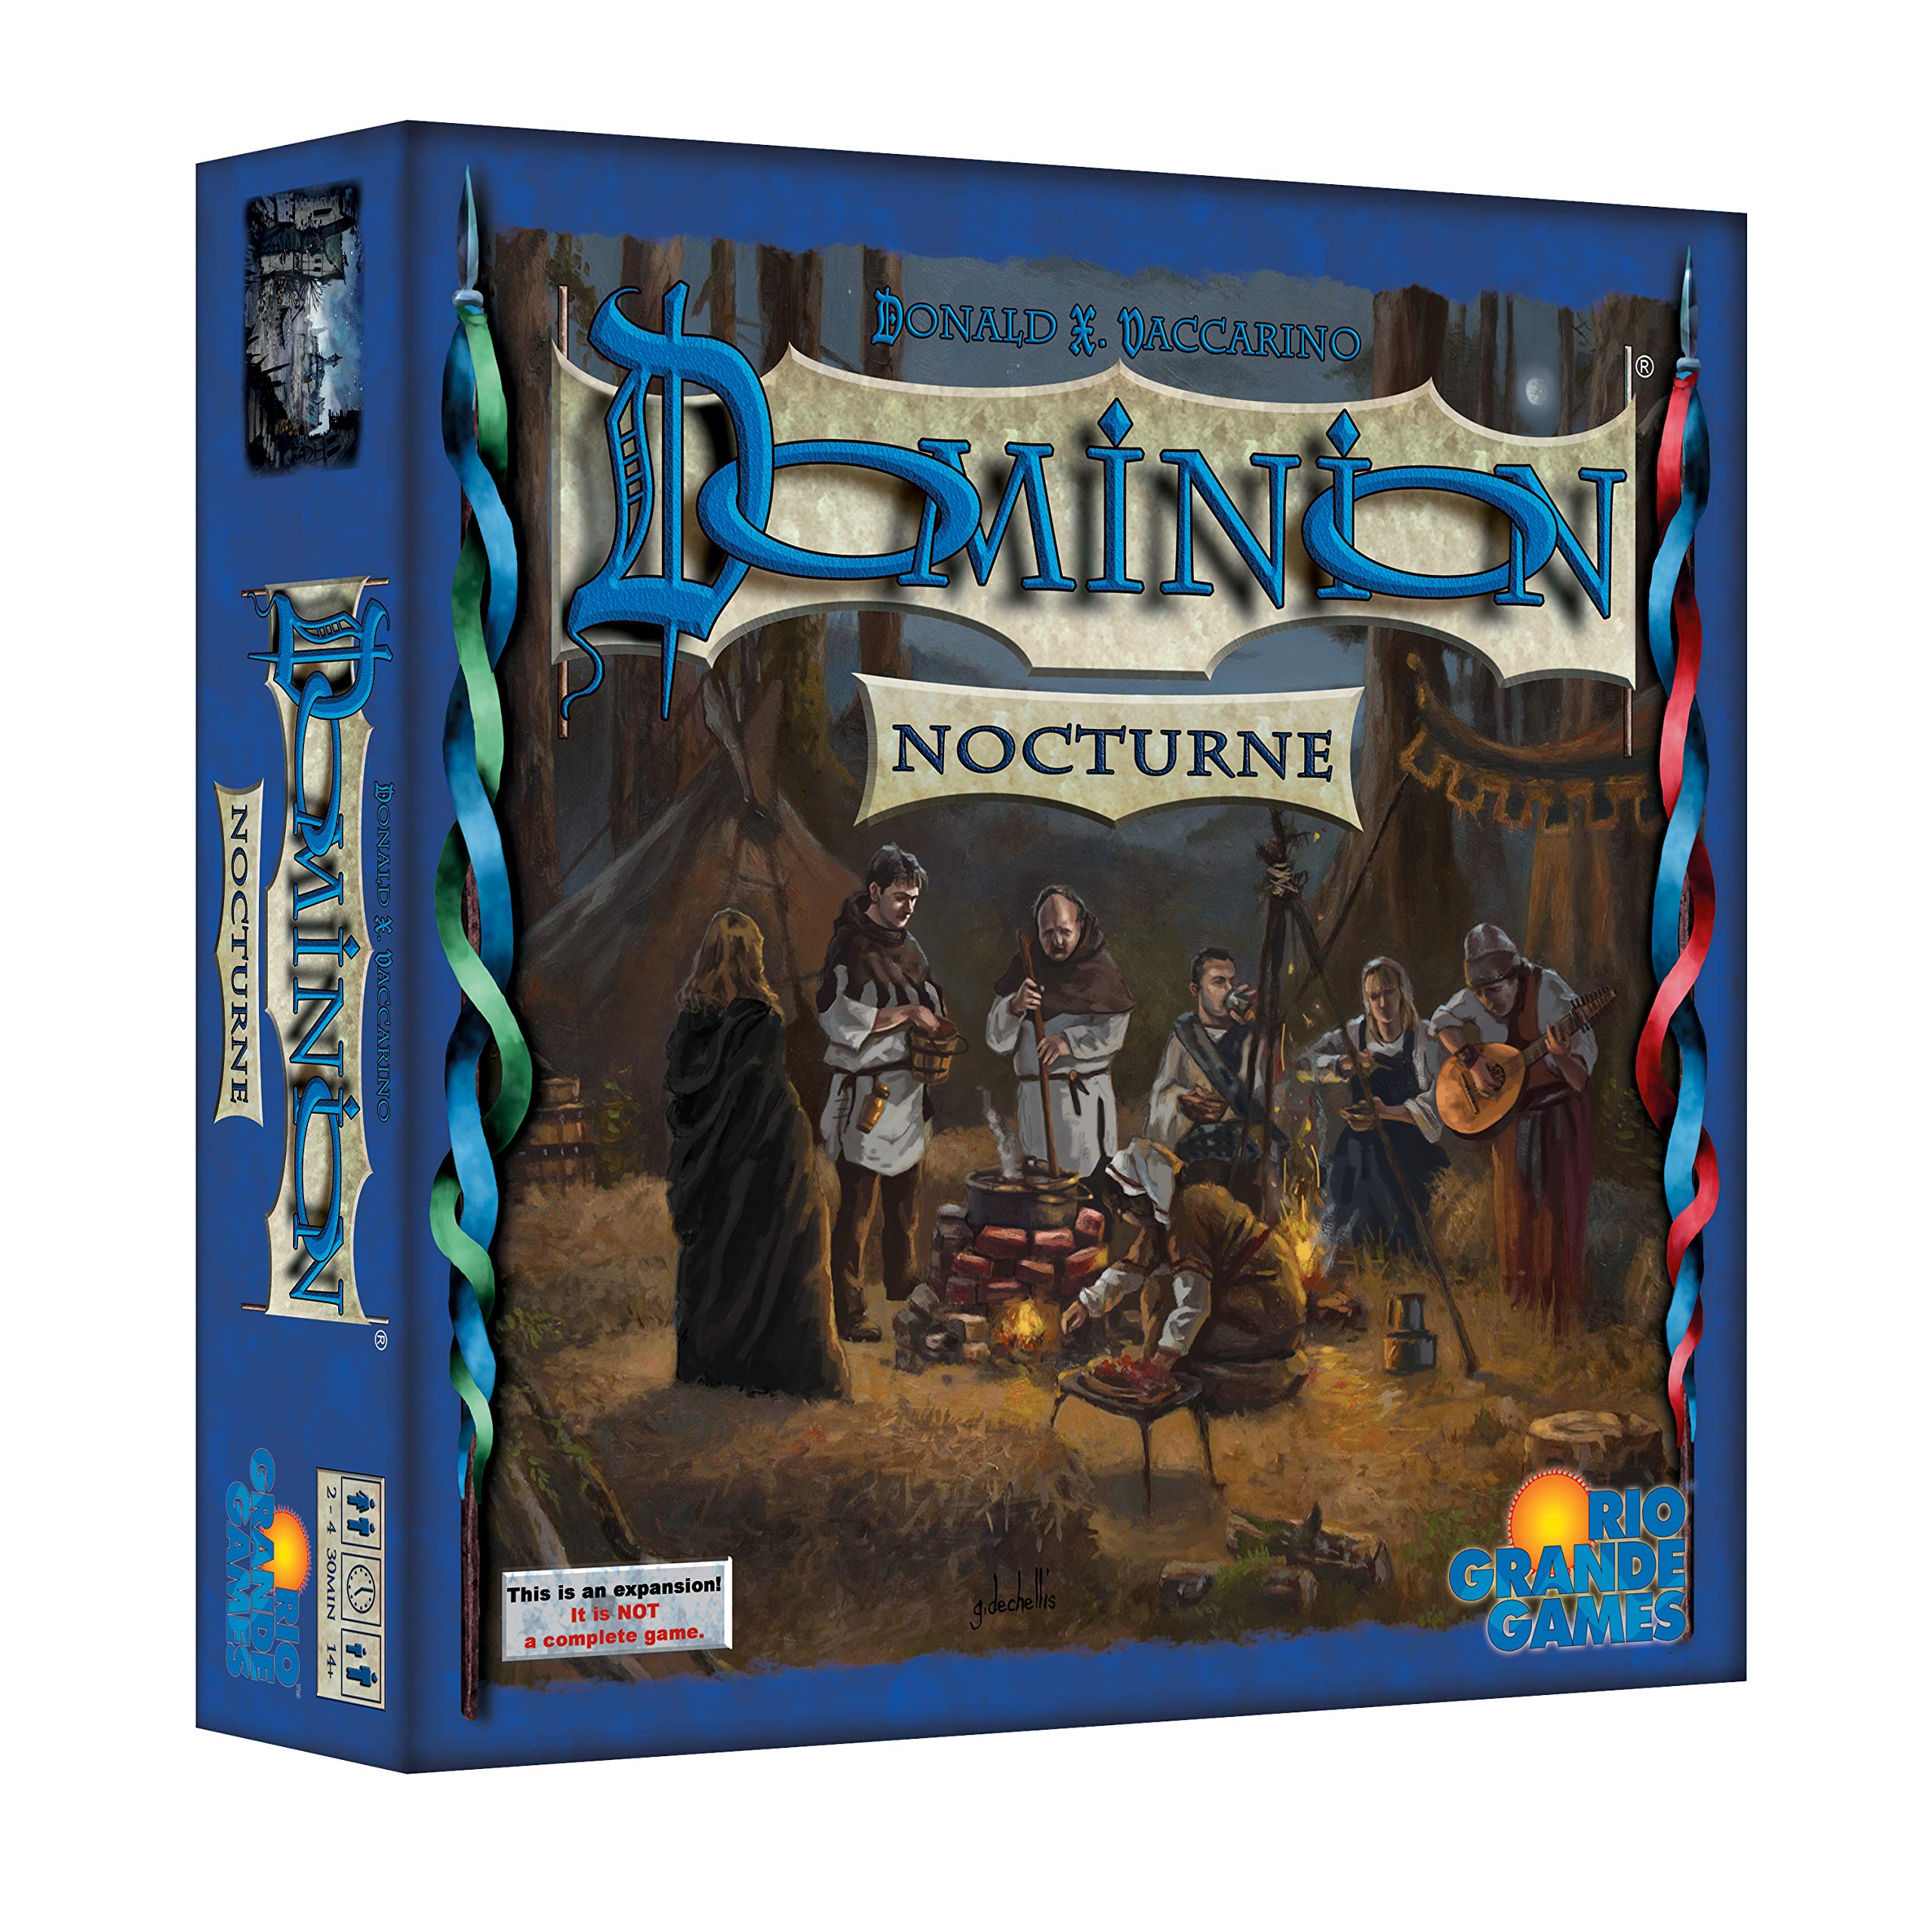 Rio Grande Games: Dominion: Nocturne, an Expansion, Strategy Board Game, 2 to 4 Players, 30 Minute Play Time, For Ages 14 and up